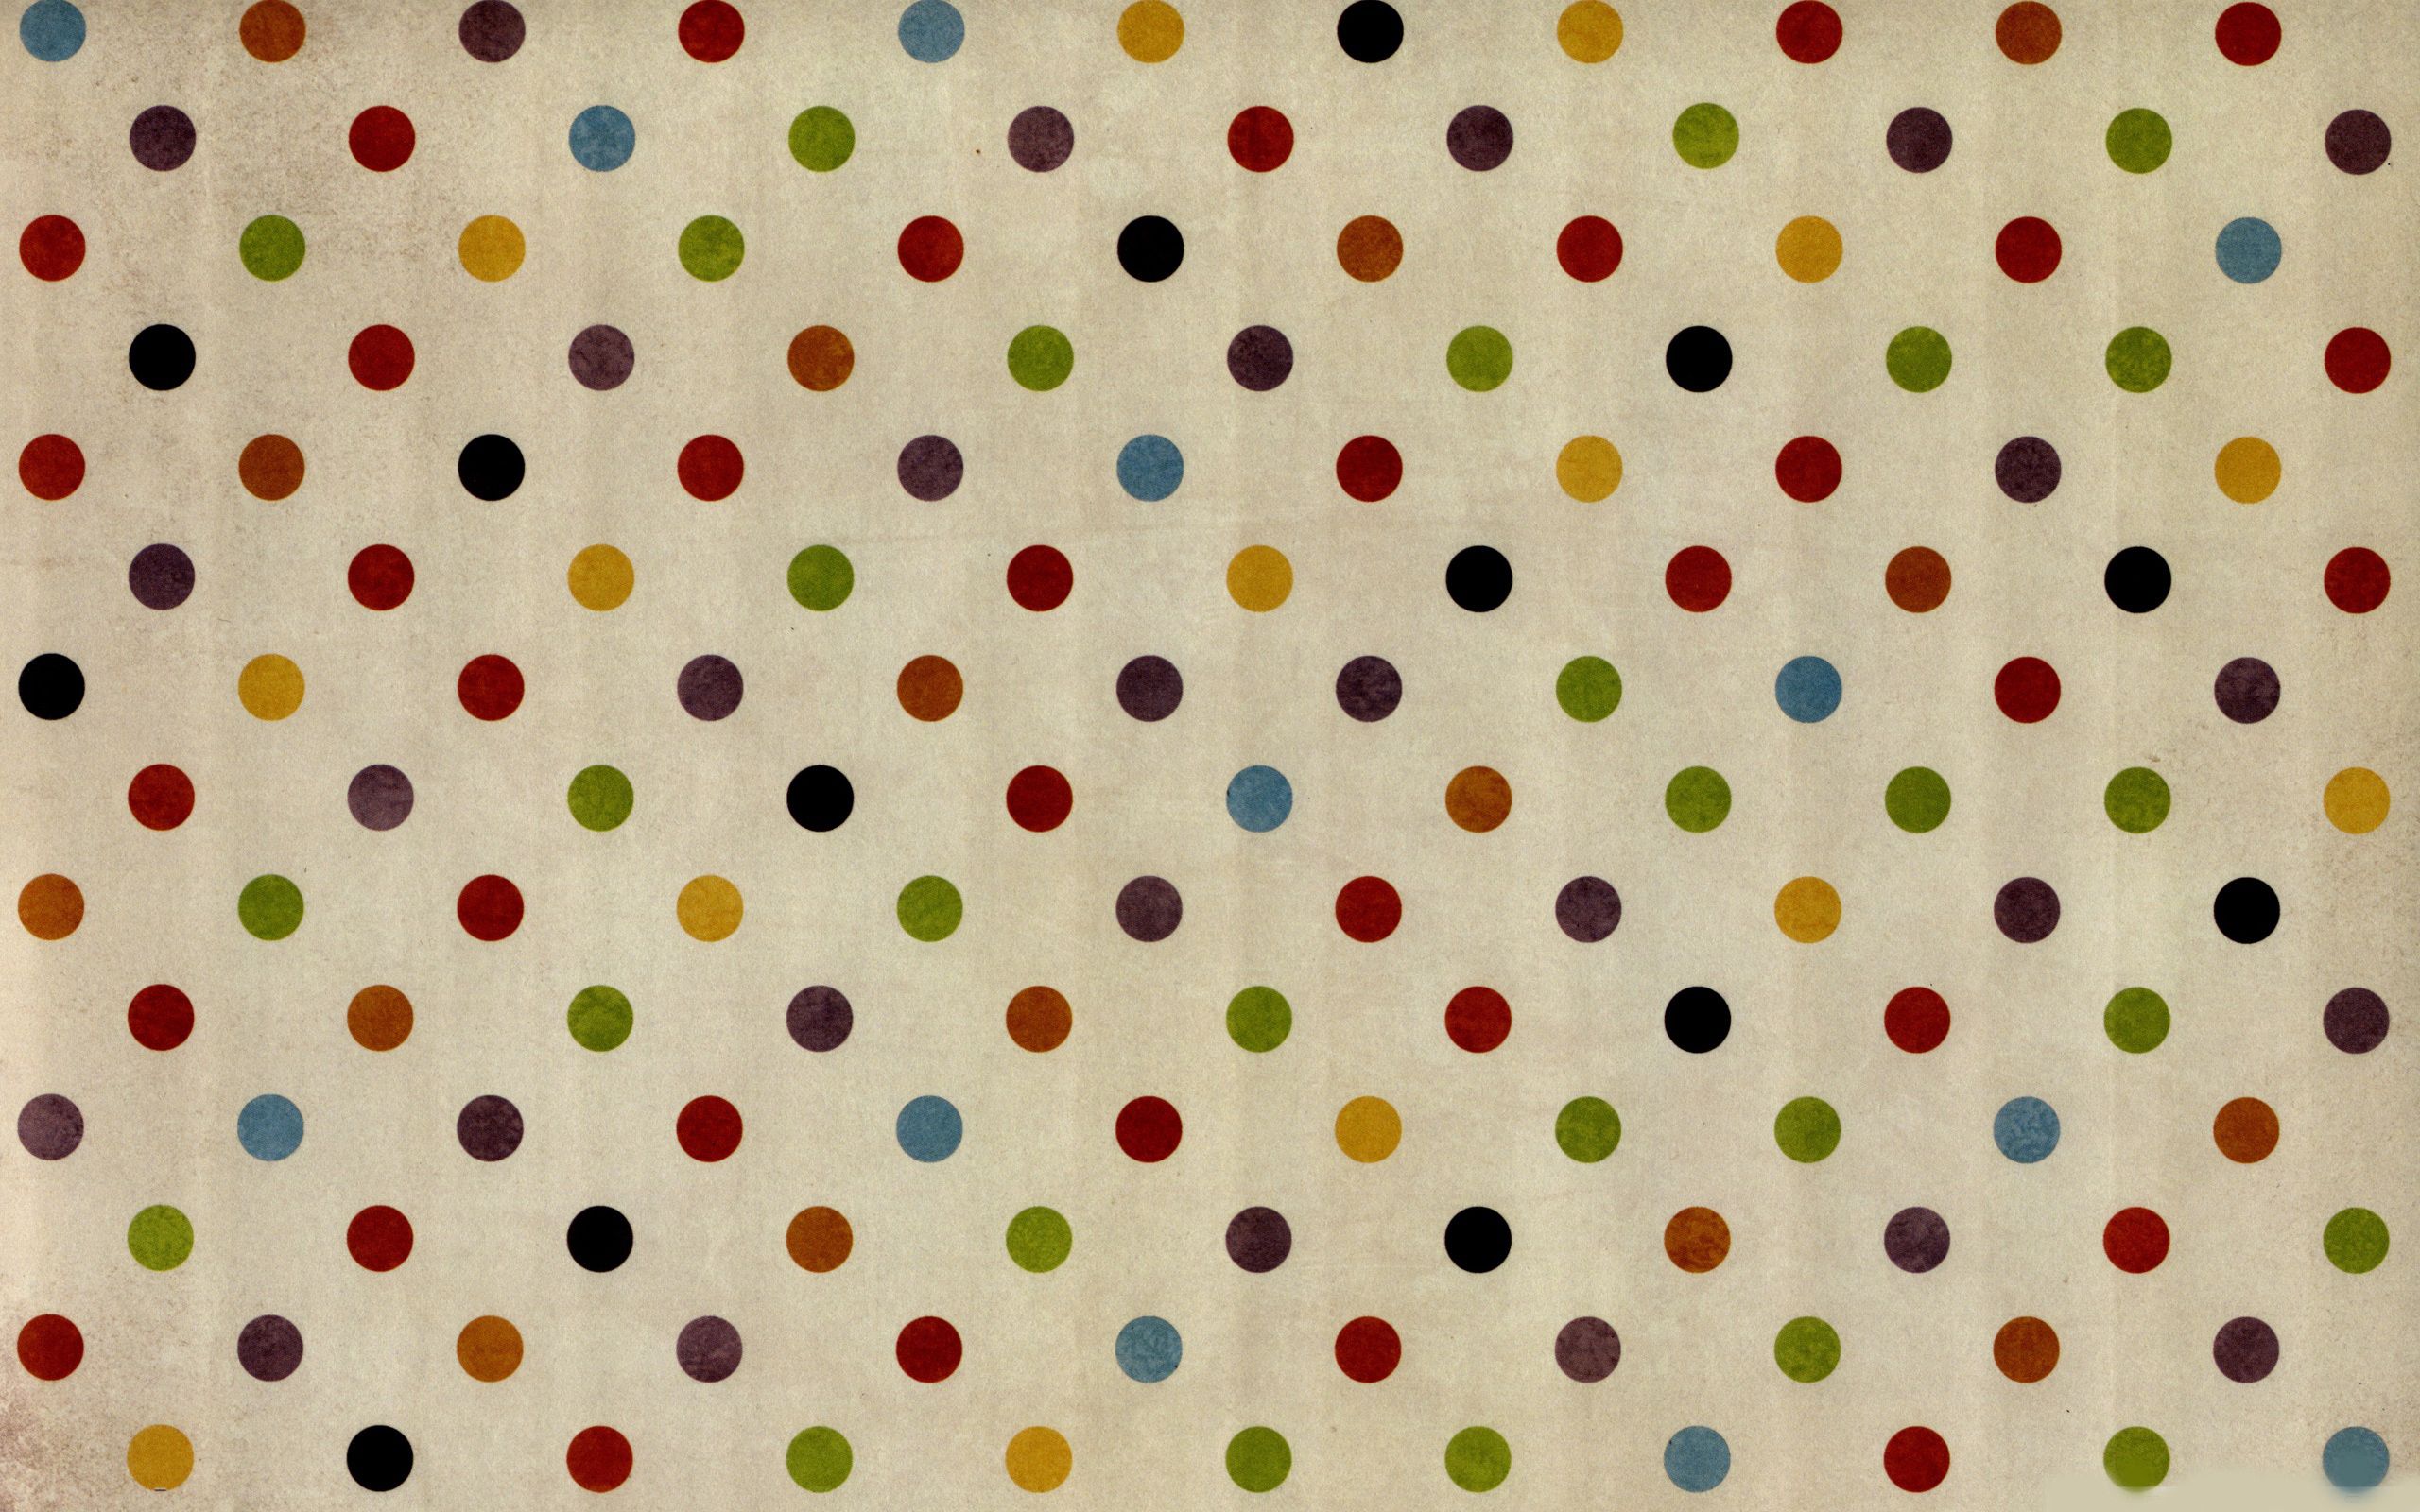 motley, textures, texture, circles, multicolored, surface Aesthetic wallpaper